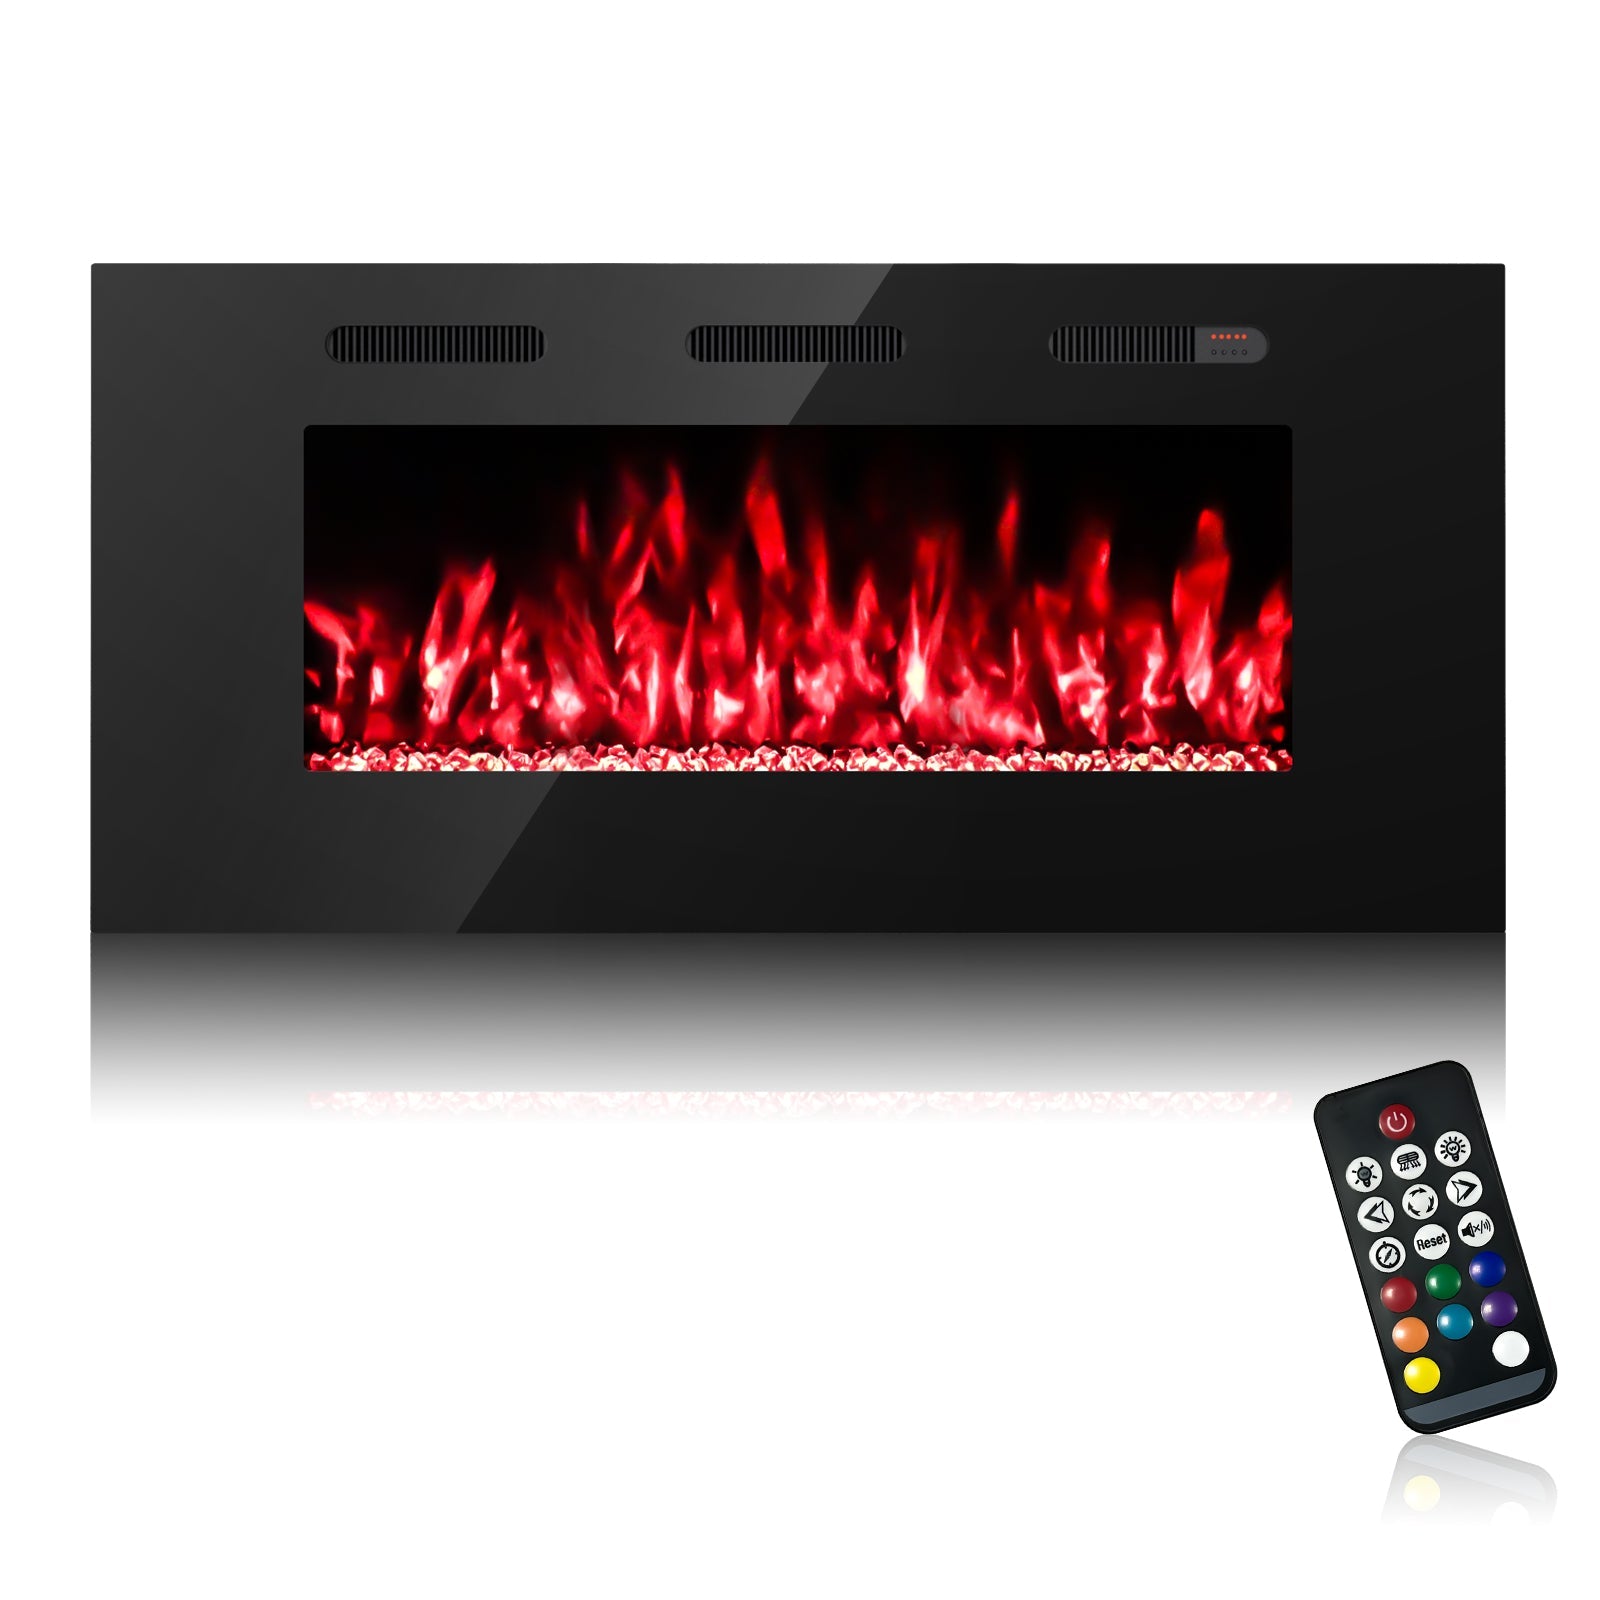 60-inch Ultra Thin Wall Mounted Electric Fireplace Heater, Modern Fire Place Eletric Fireplace for Indoor Living Room Bedroom Use, Realistic LED Flame with Remote Control, Crystals, Black